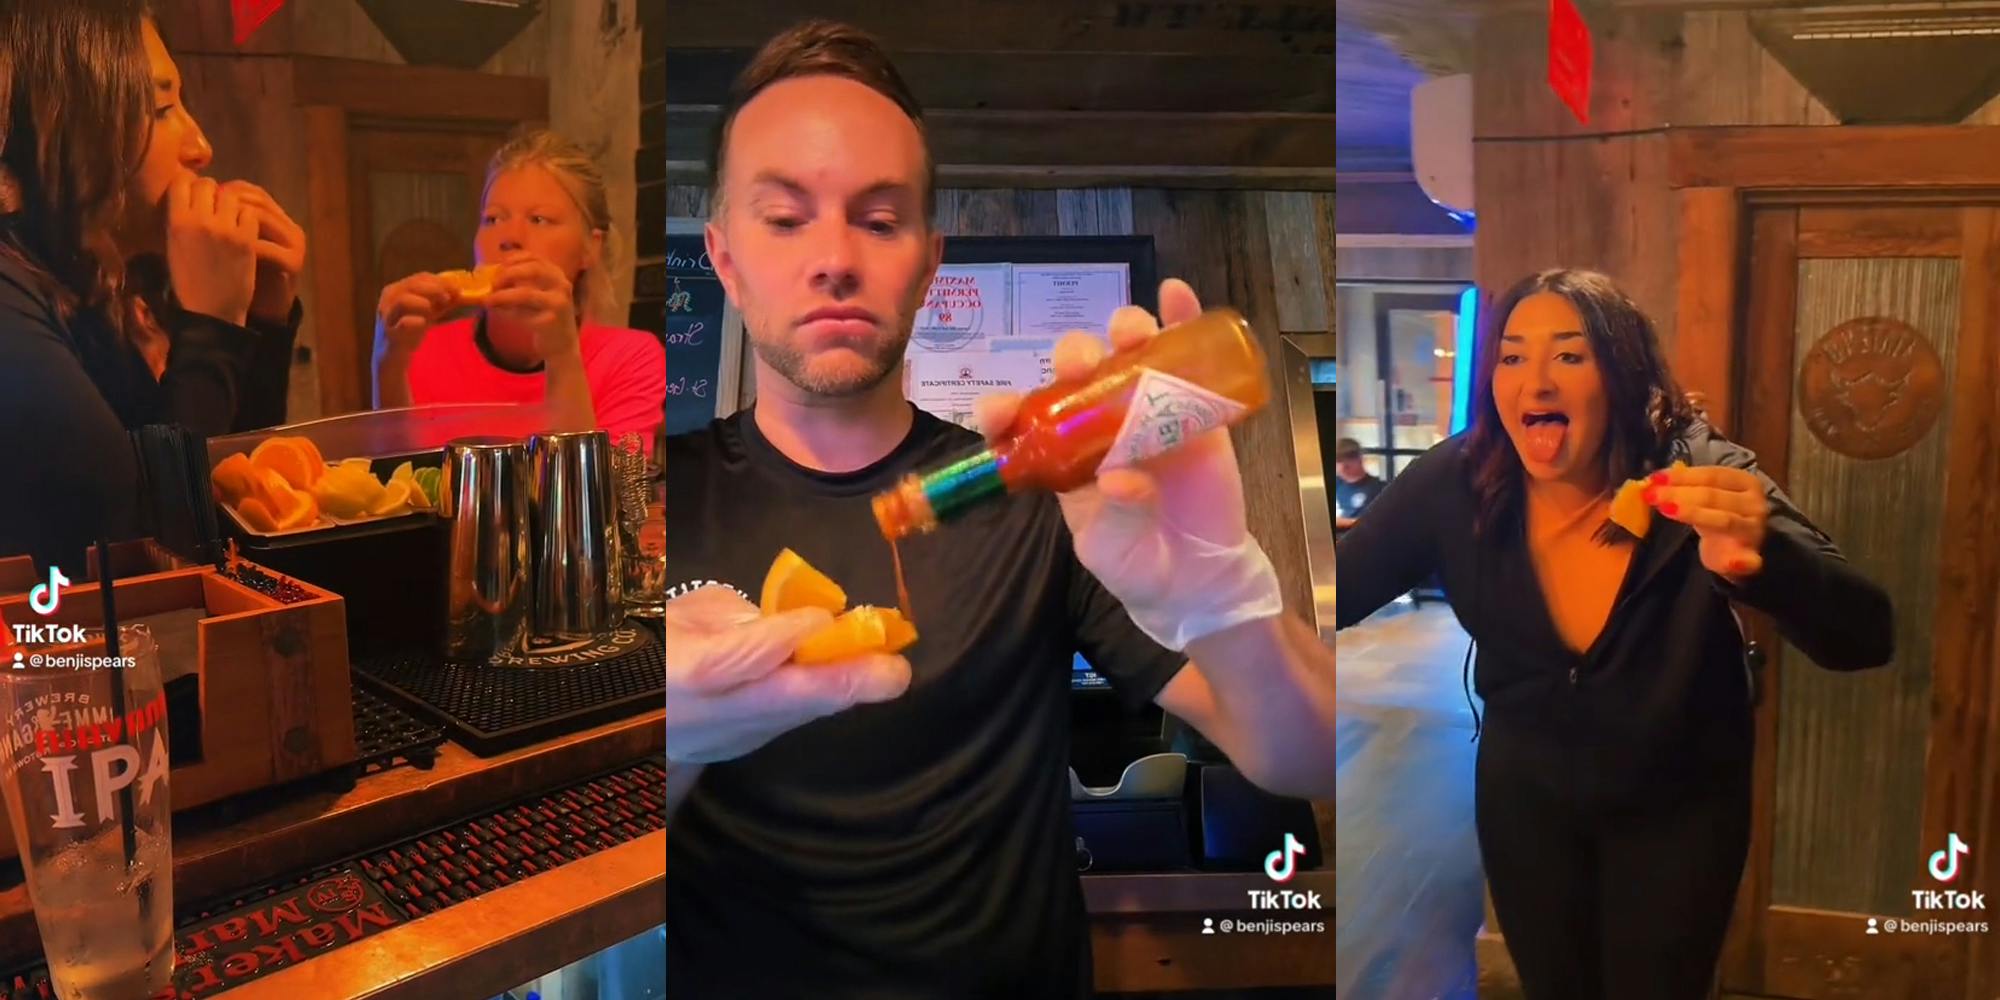 women biting into oranges at bar (l) bartender putting Tabasco sauce on orange slices (c) woman holding orange slice with mouth open (r)